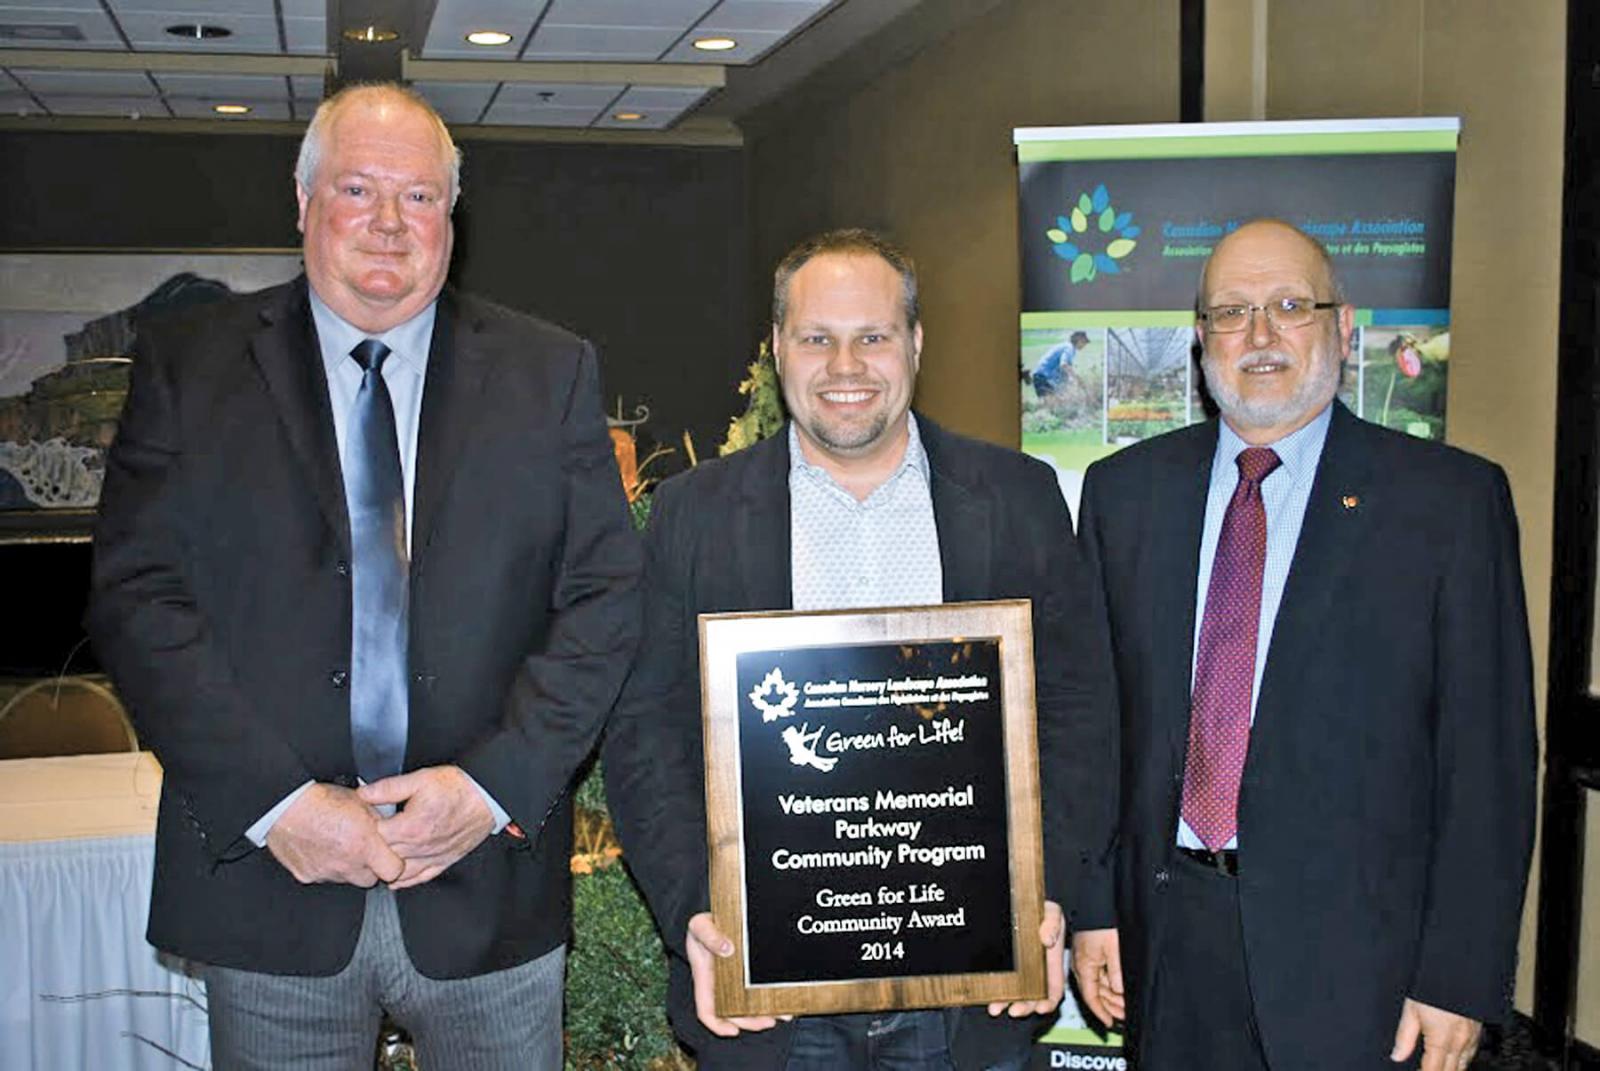 Bill Hardy, chair of the CNLA Public Relations Committee, presents Grant Harrison, London Chapter president, and Barry Sandler, executive director of the Veterans Memorial Parkway Community Program, with the Green for Life Community Award.